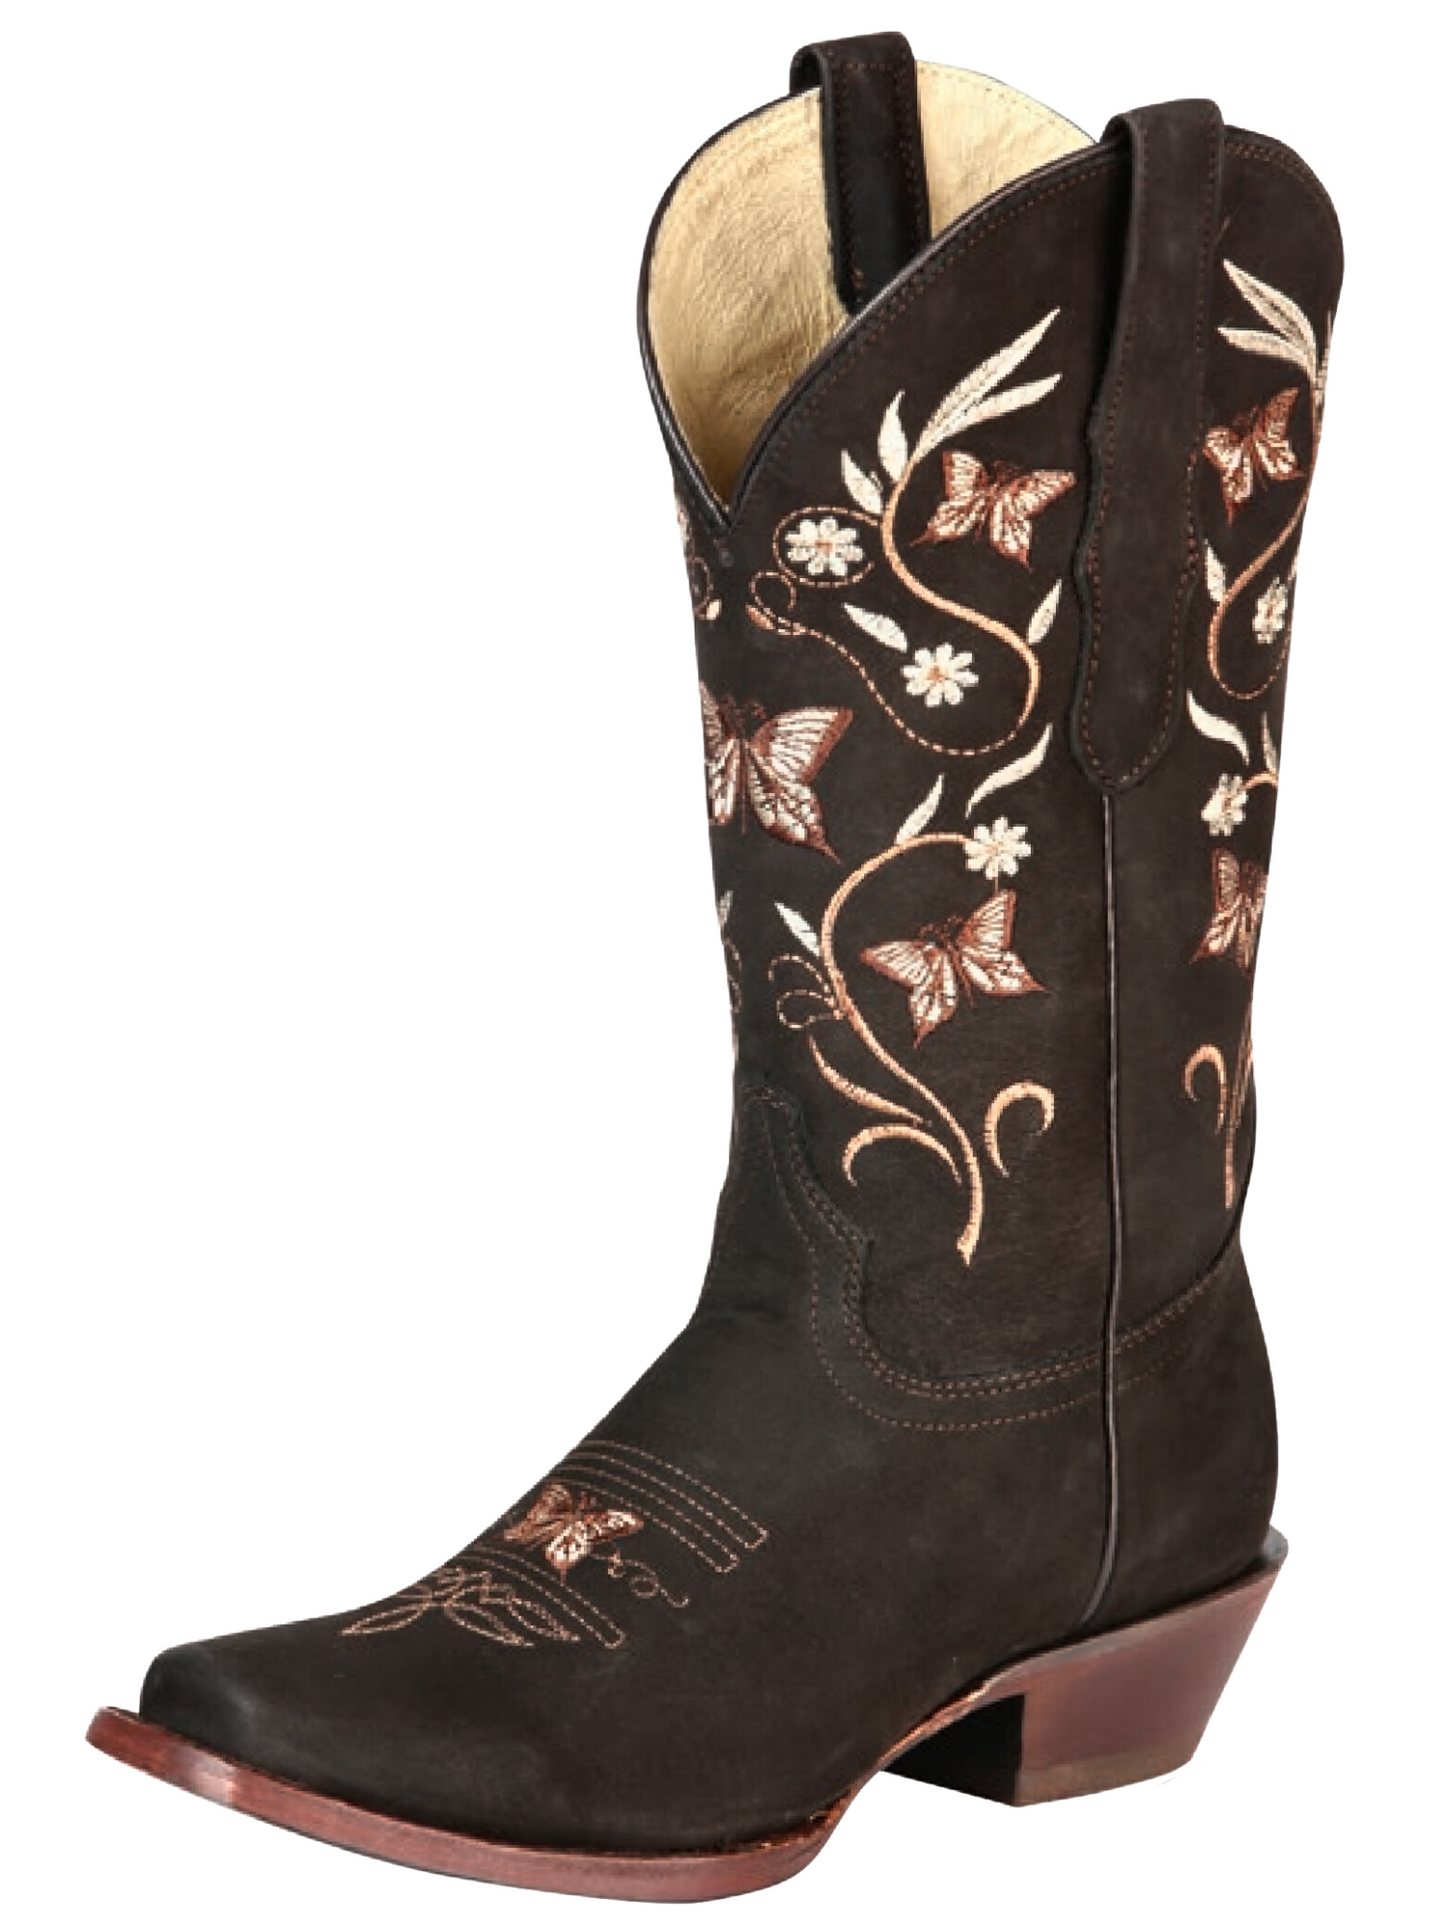 Rodeo Cowboy Boots with Nubuck Leather Butterflies Embroidered Tube for Women 'El General' - ID: 51227